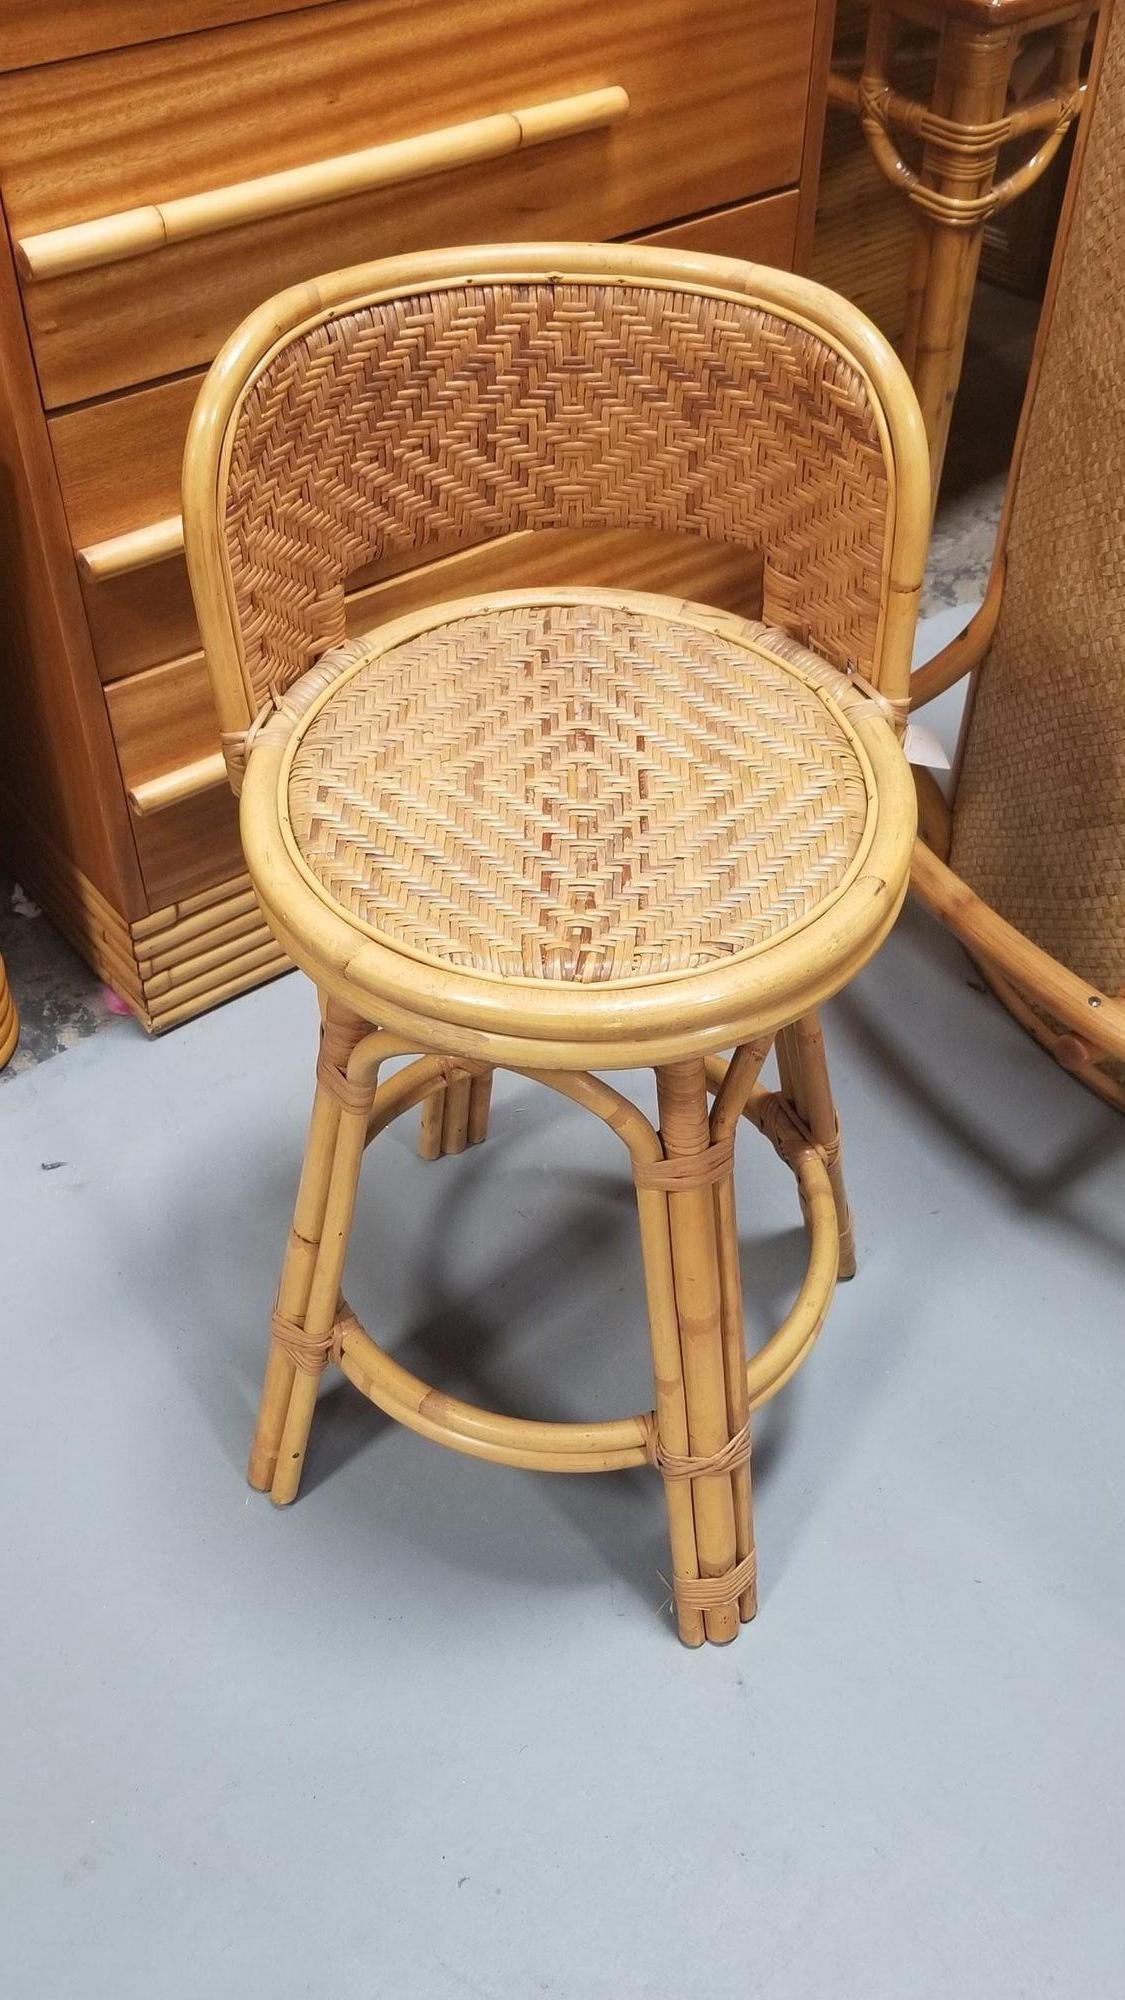 Rattan and wicker bar stools with swivel seats. These chairs are slightly shorter than average bar stool height, will be a perfect for a lower bar or for your unique interior needs.

Seat Height: 24